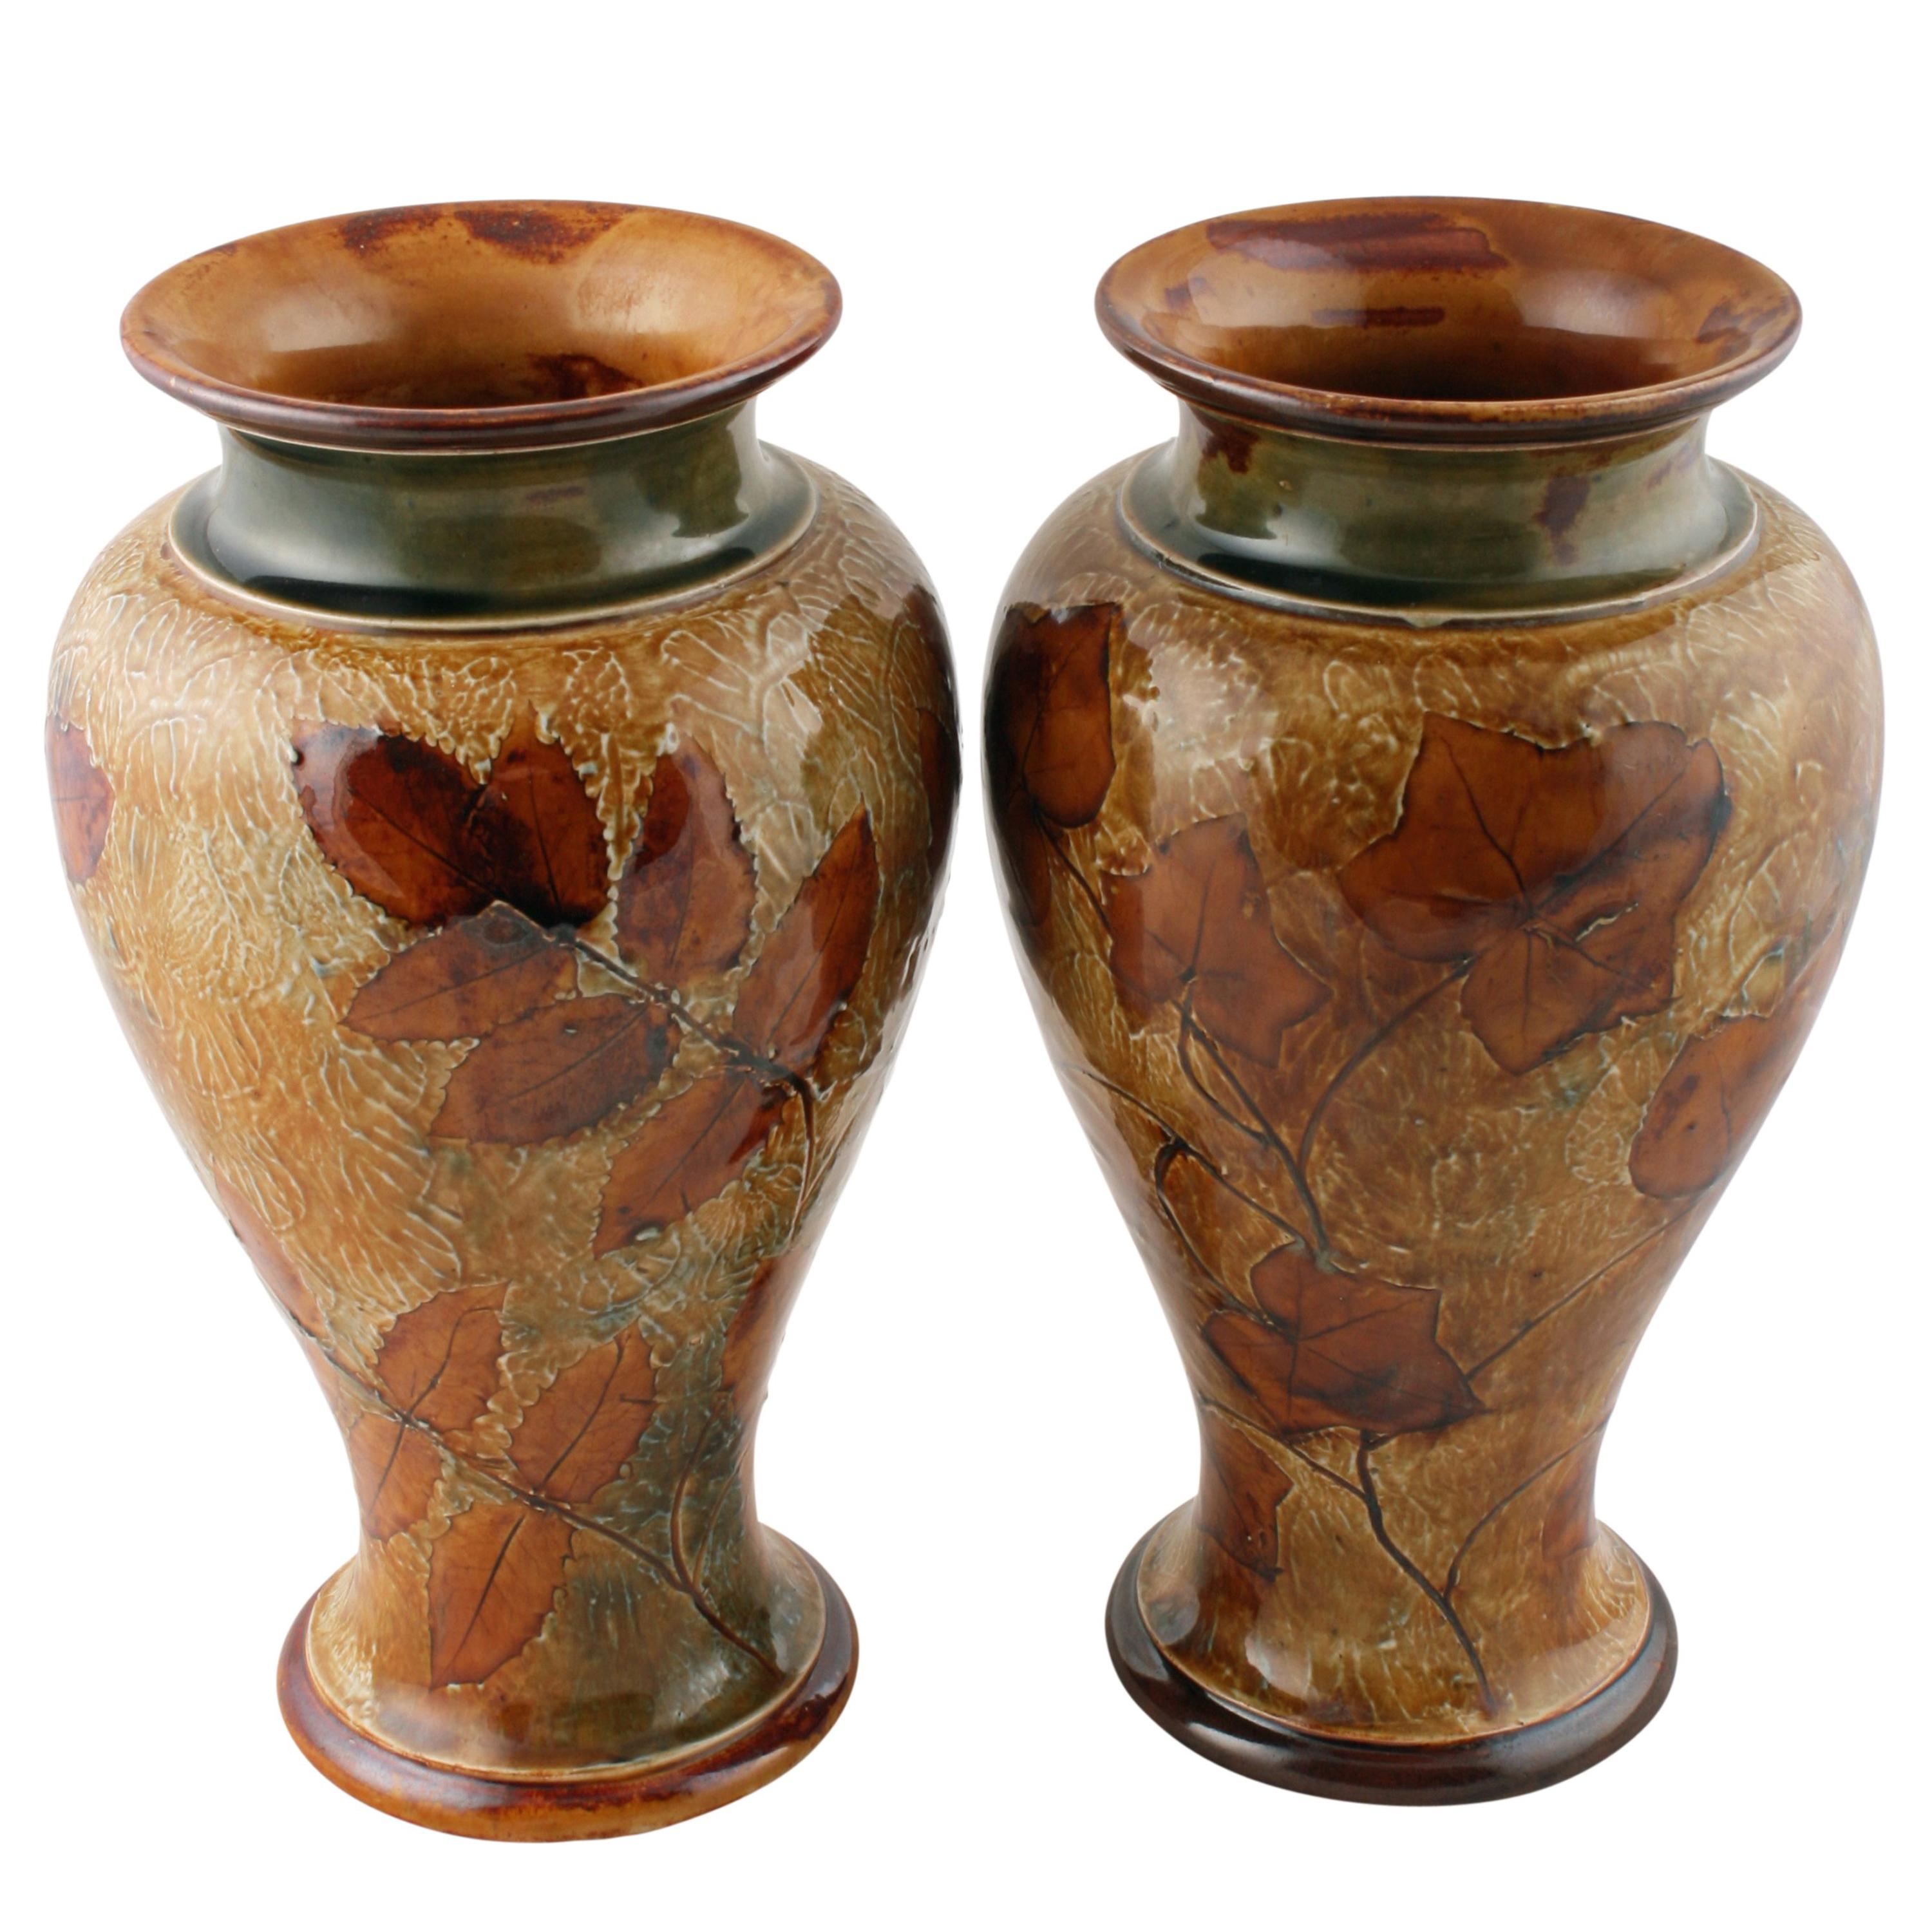 Pair of 19th Century Victorian Royal Doulton  Pottery Vases